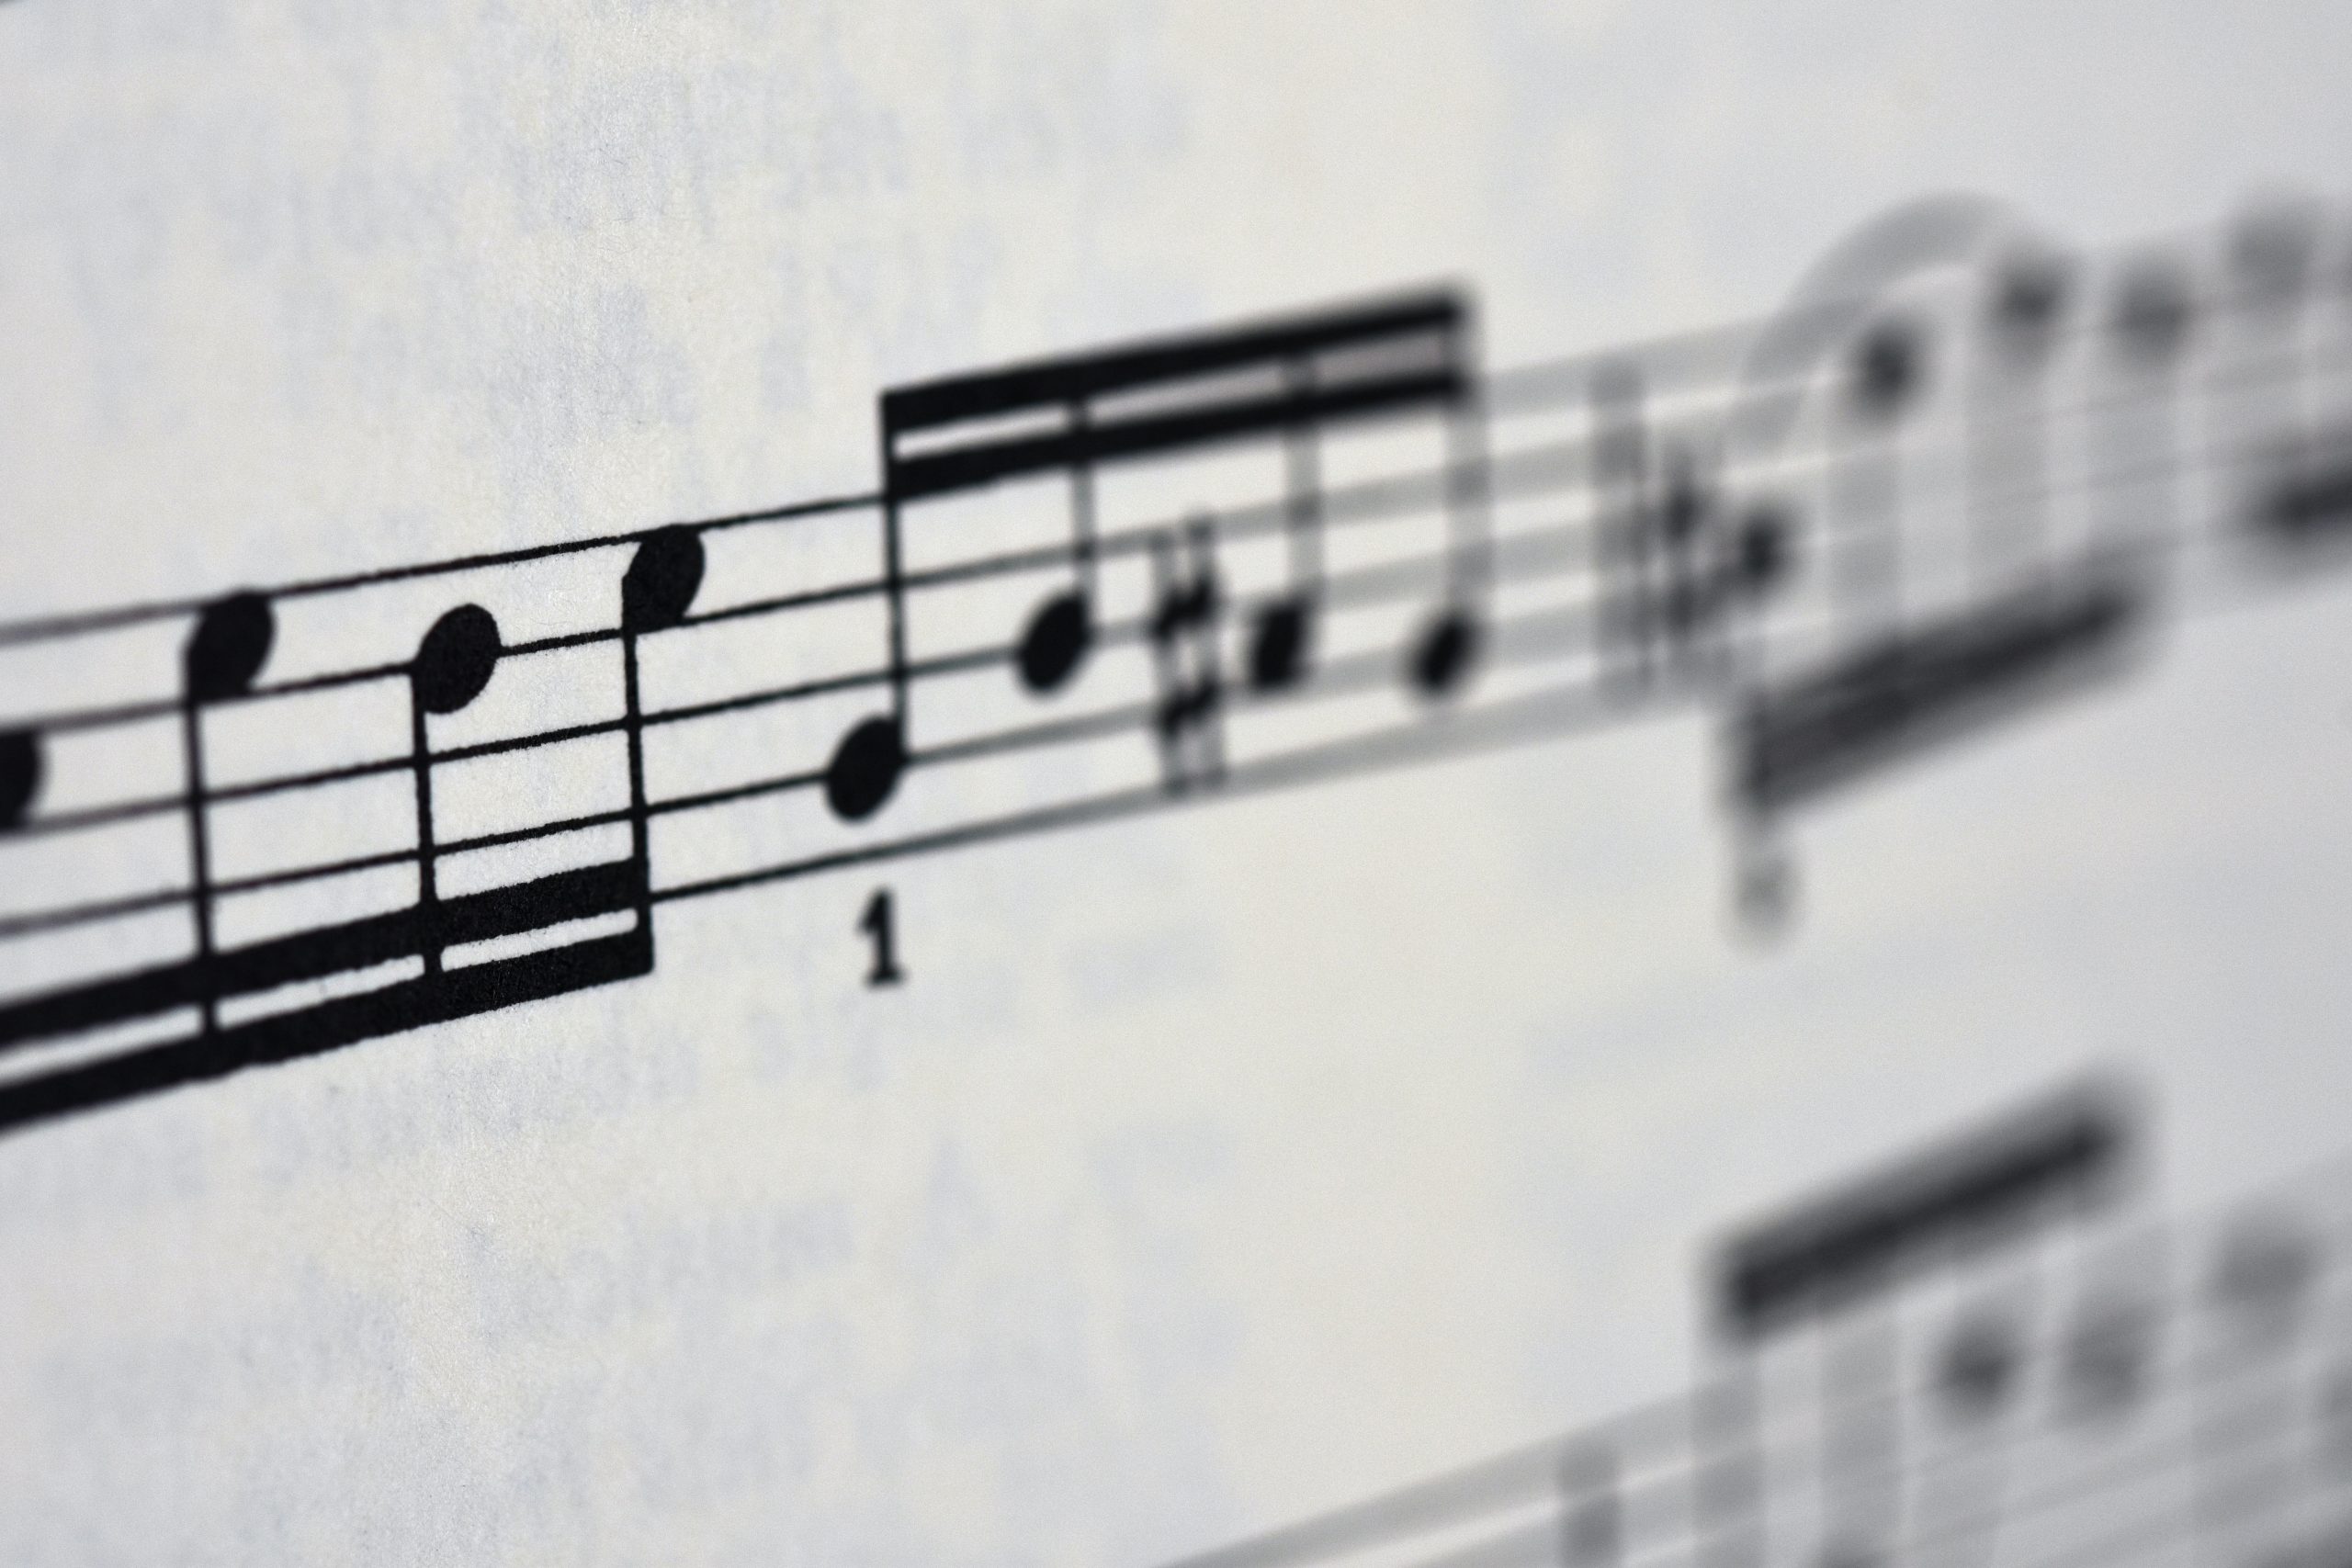 The image shows a close-up of a sheet of music with a focus on a section of the staff, where musical notes are printed. The shallow depth of field blurs the notes in the foreground and background, highlighting the crisp detail of the notes in the center. A number "1" is visible, possibly indicating a measure number or a finger positioning for playing an instrument.